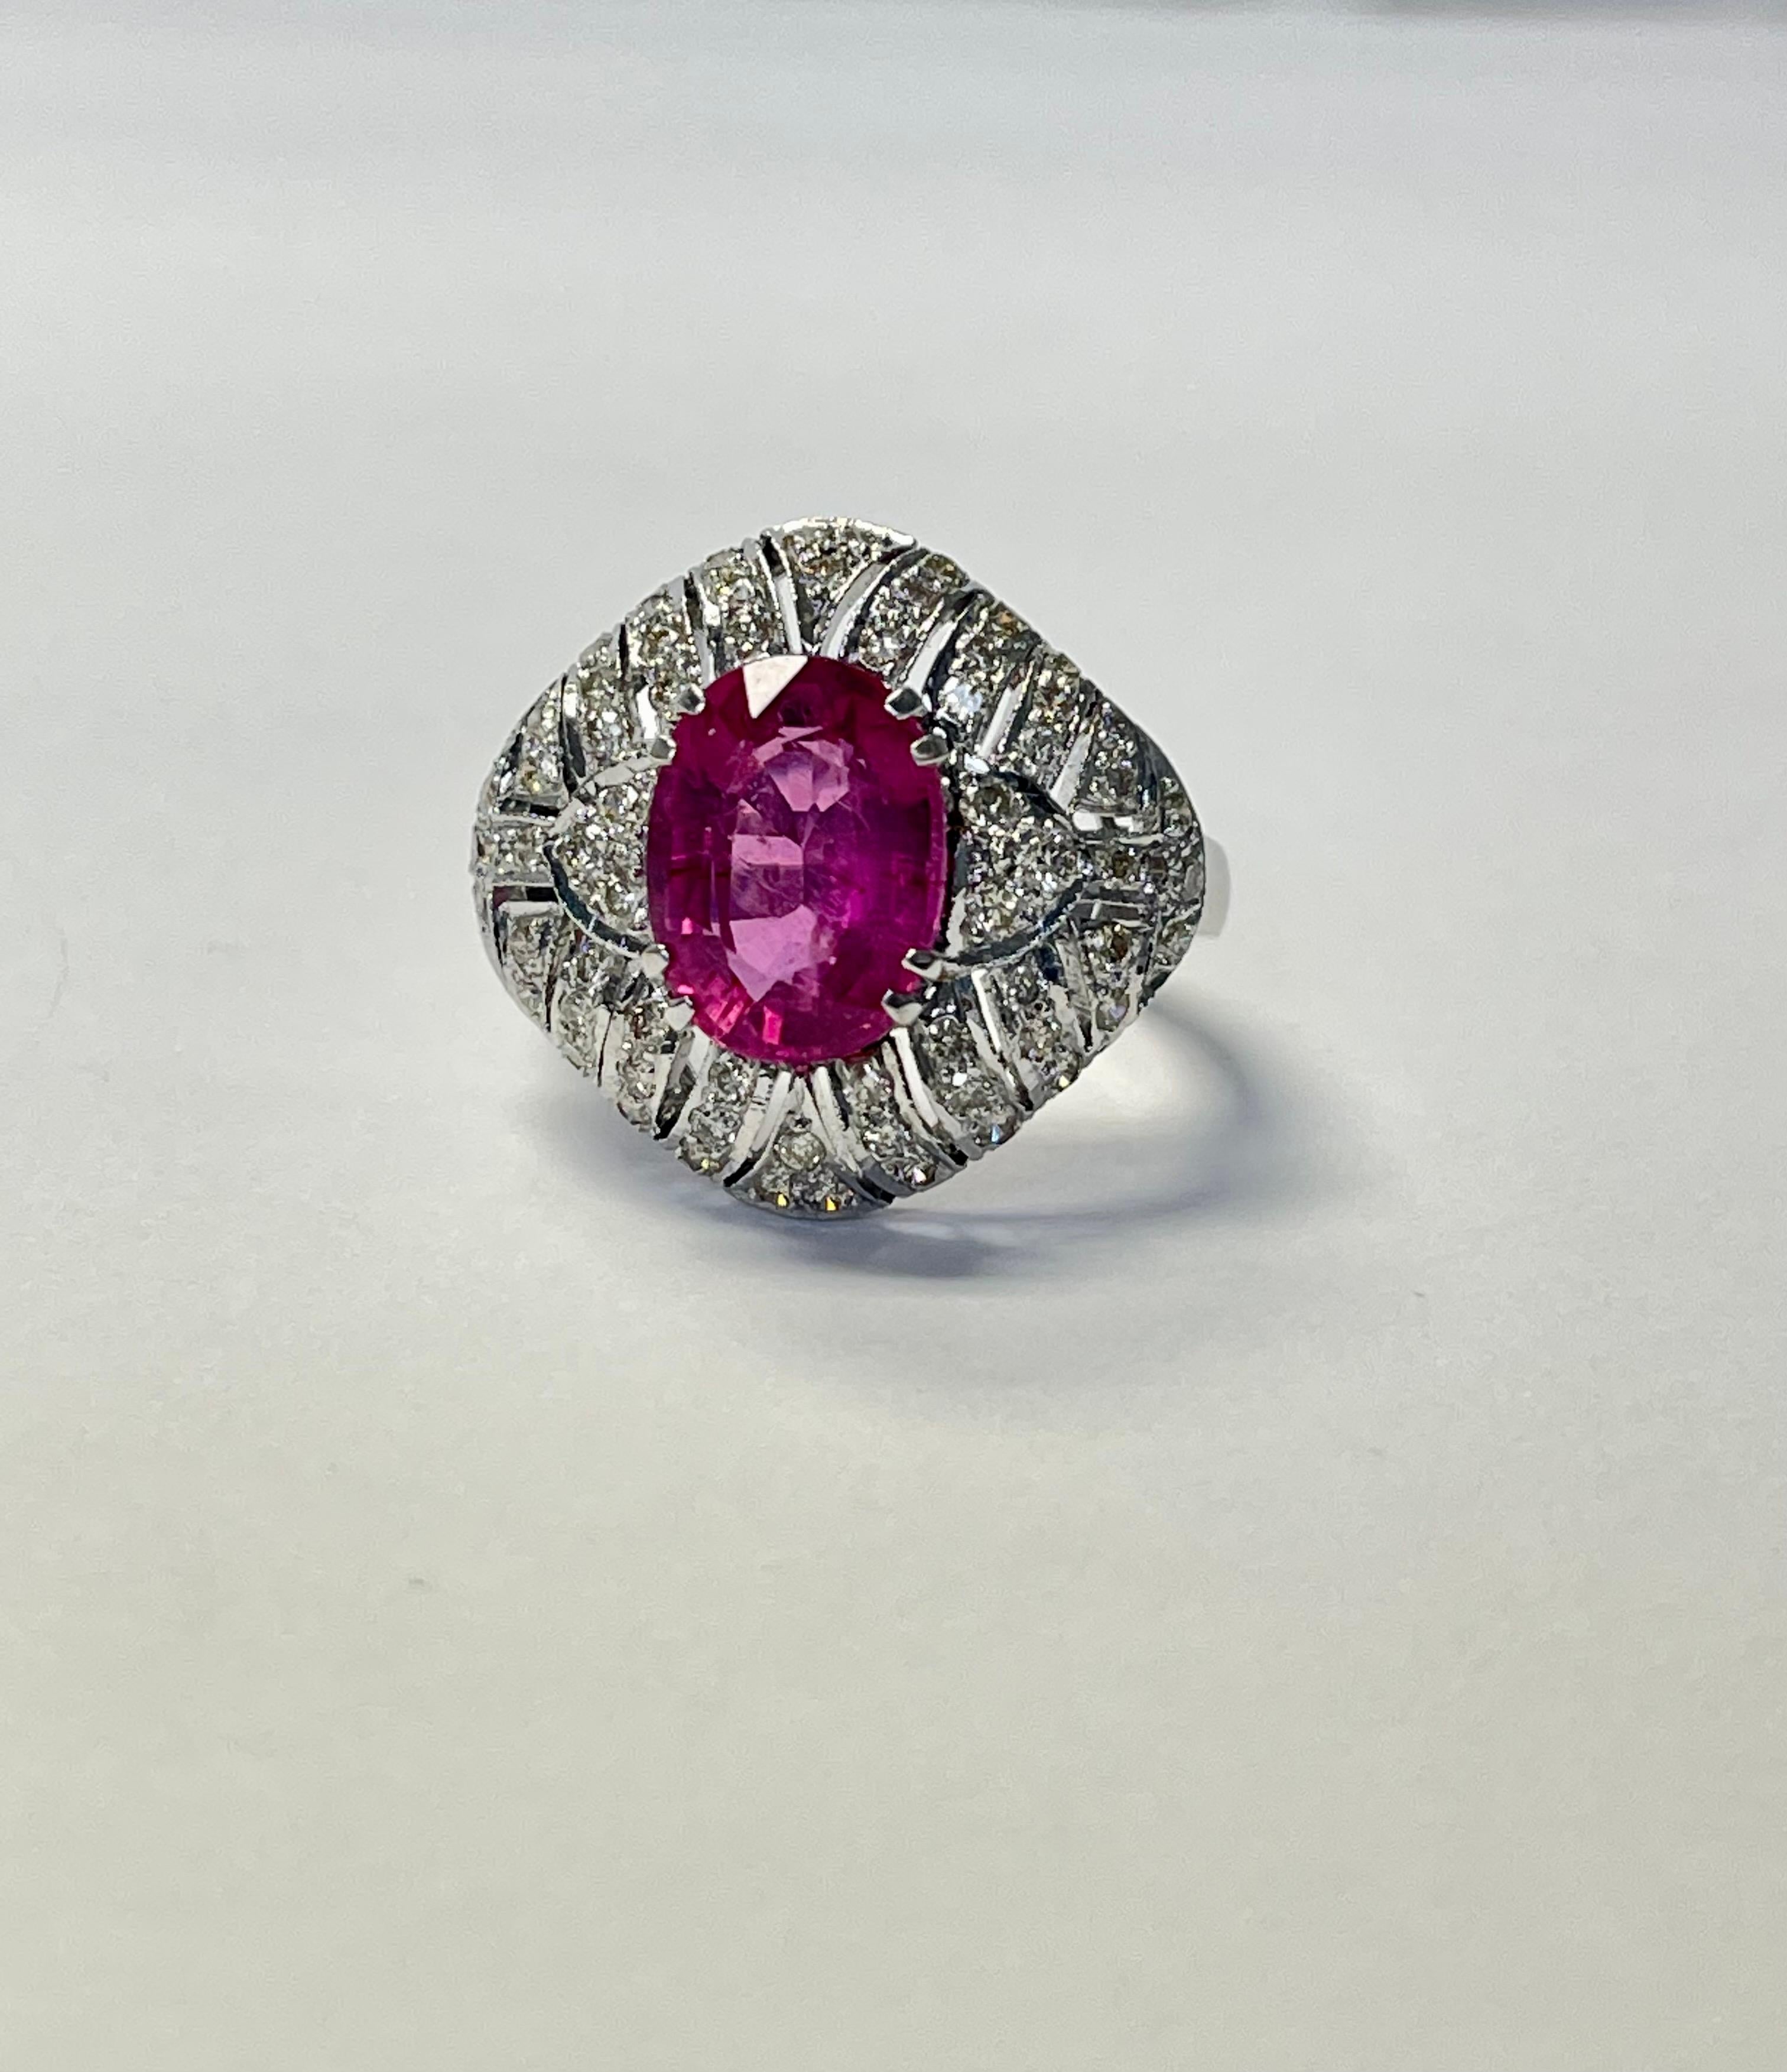 Contemporary 1920 Art Deco Diamond and Oval Rubellite Engagement Ring in 18K White Gold For Sale